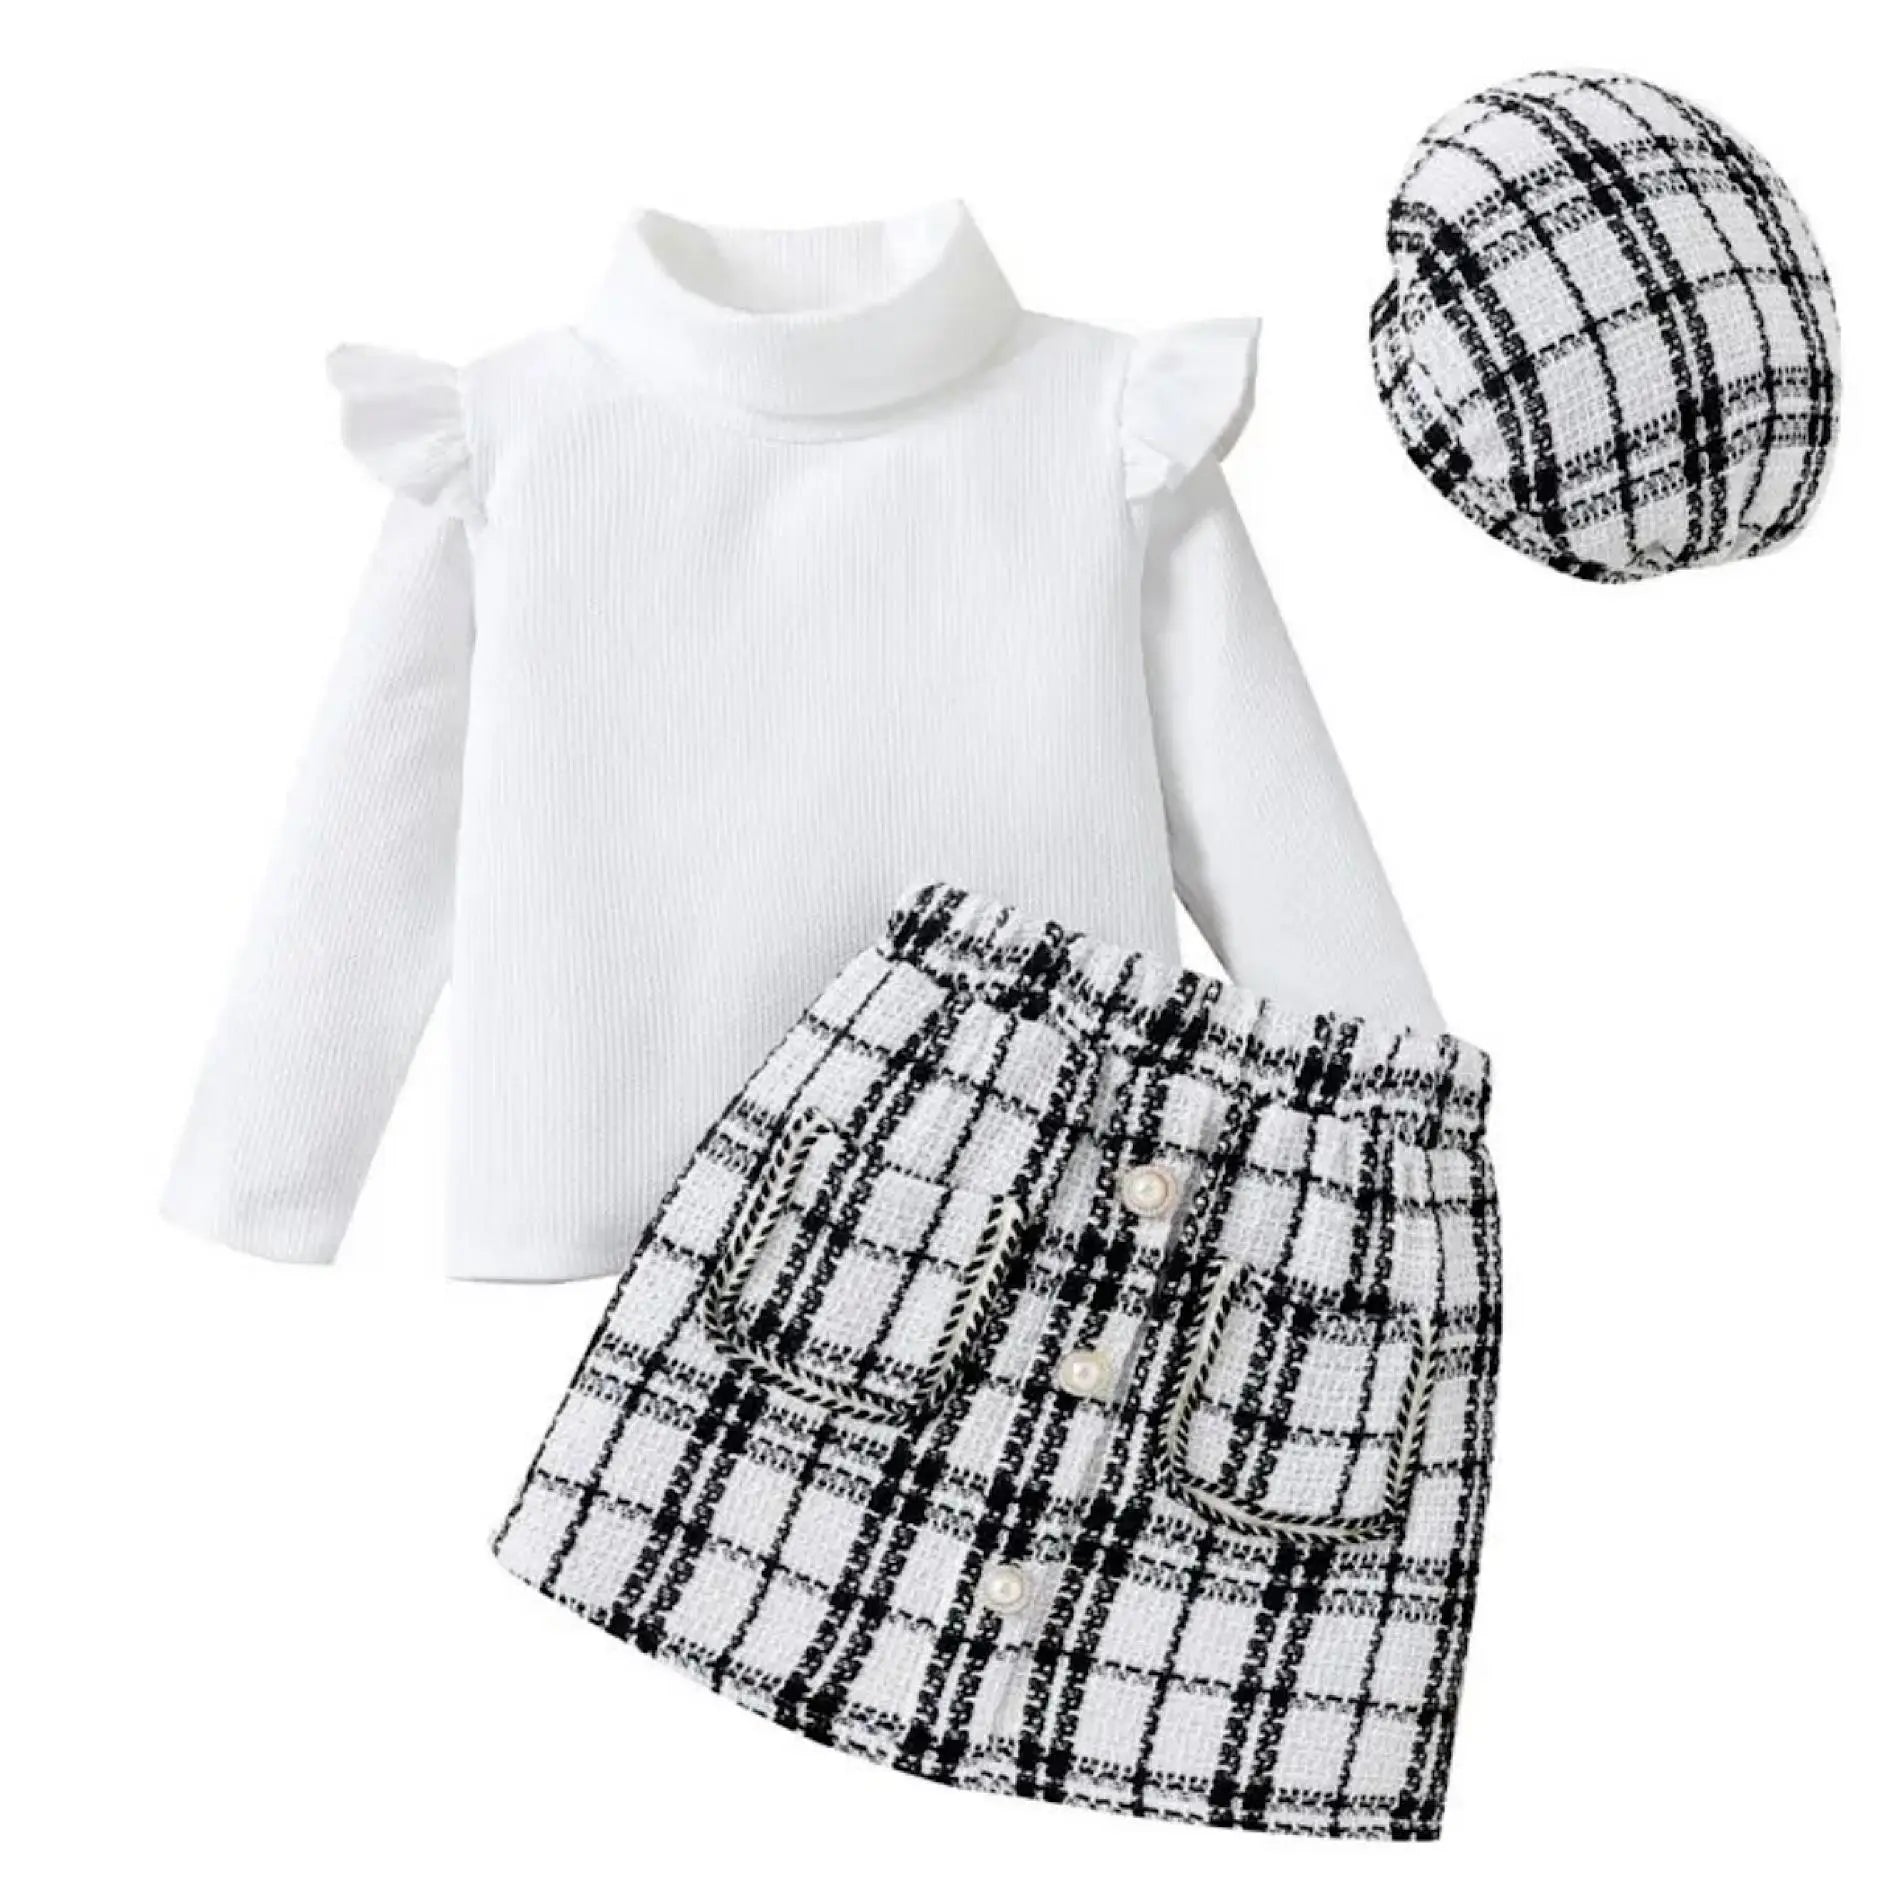 Toddler Skirt Set White Ribbed Top Plaid Skirt and Matching Hat, Color